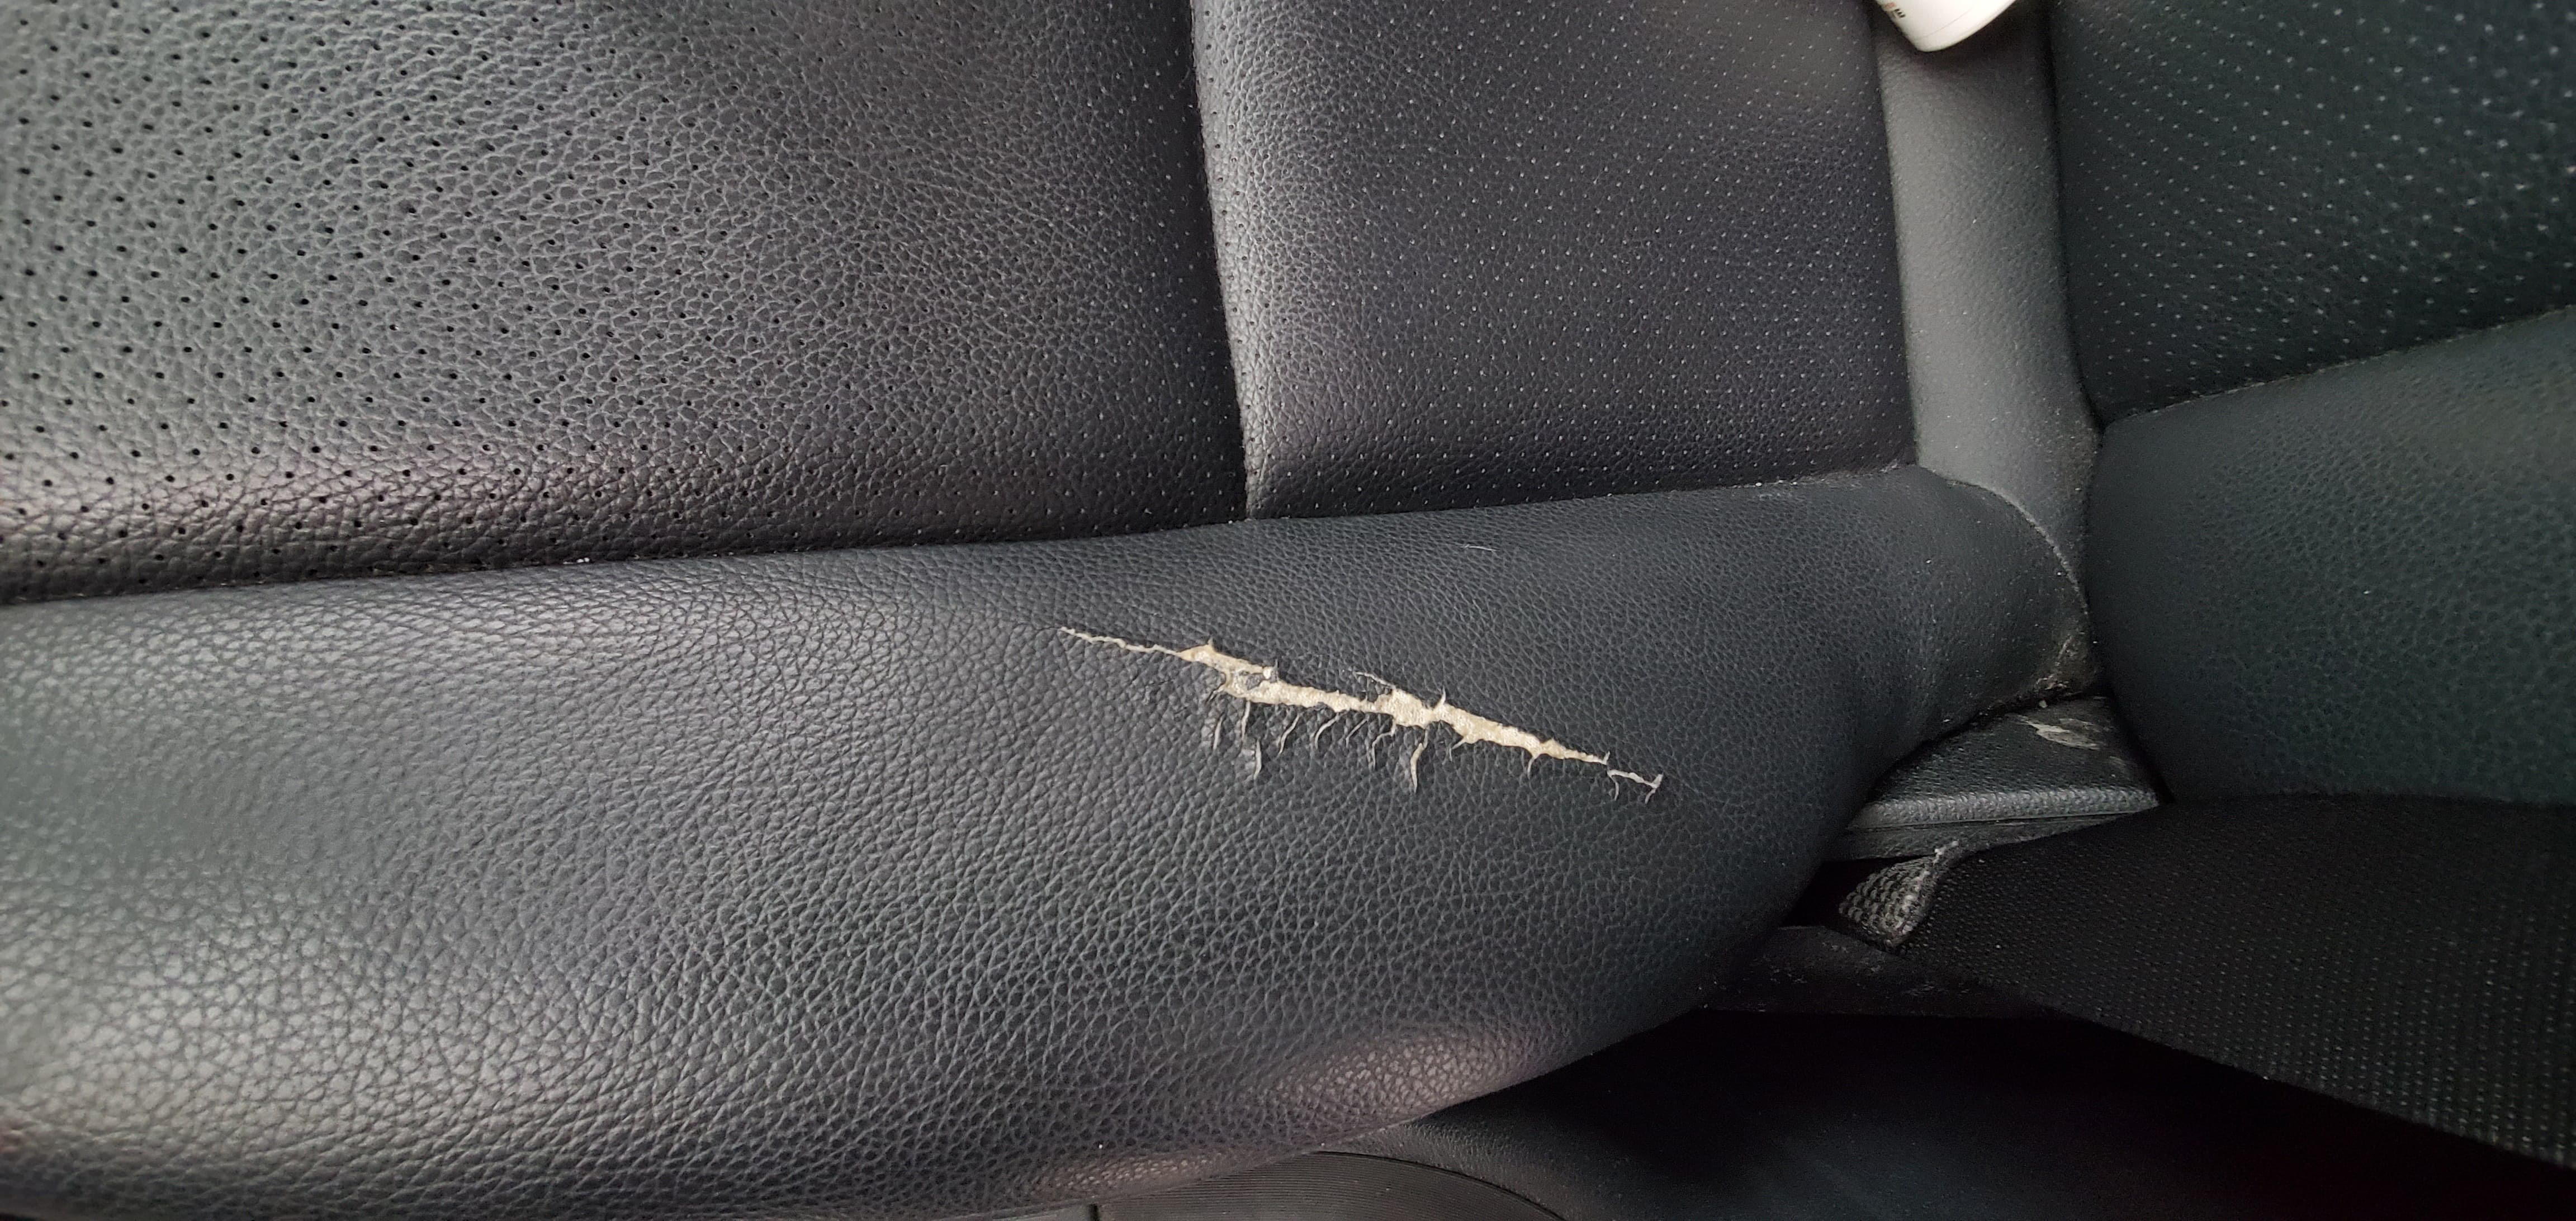 How To Repair A Leather Car Seat, Leather Chair Tear Repair Kit